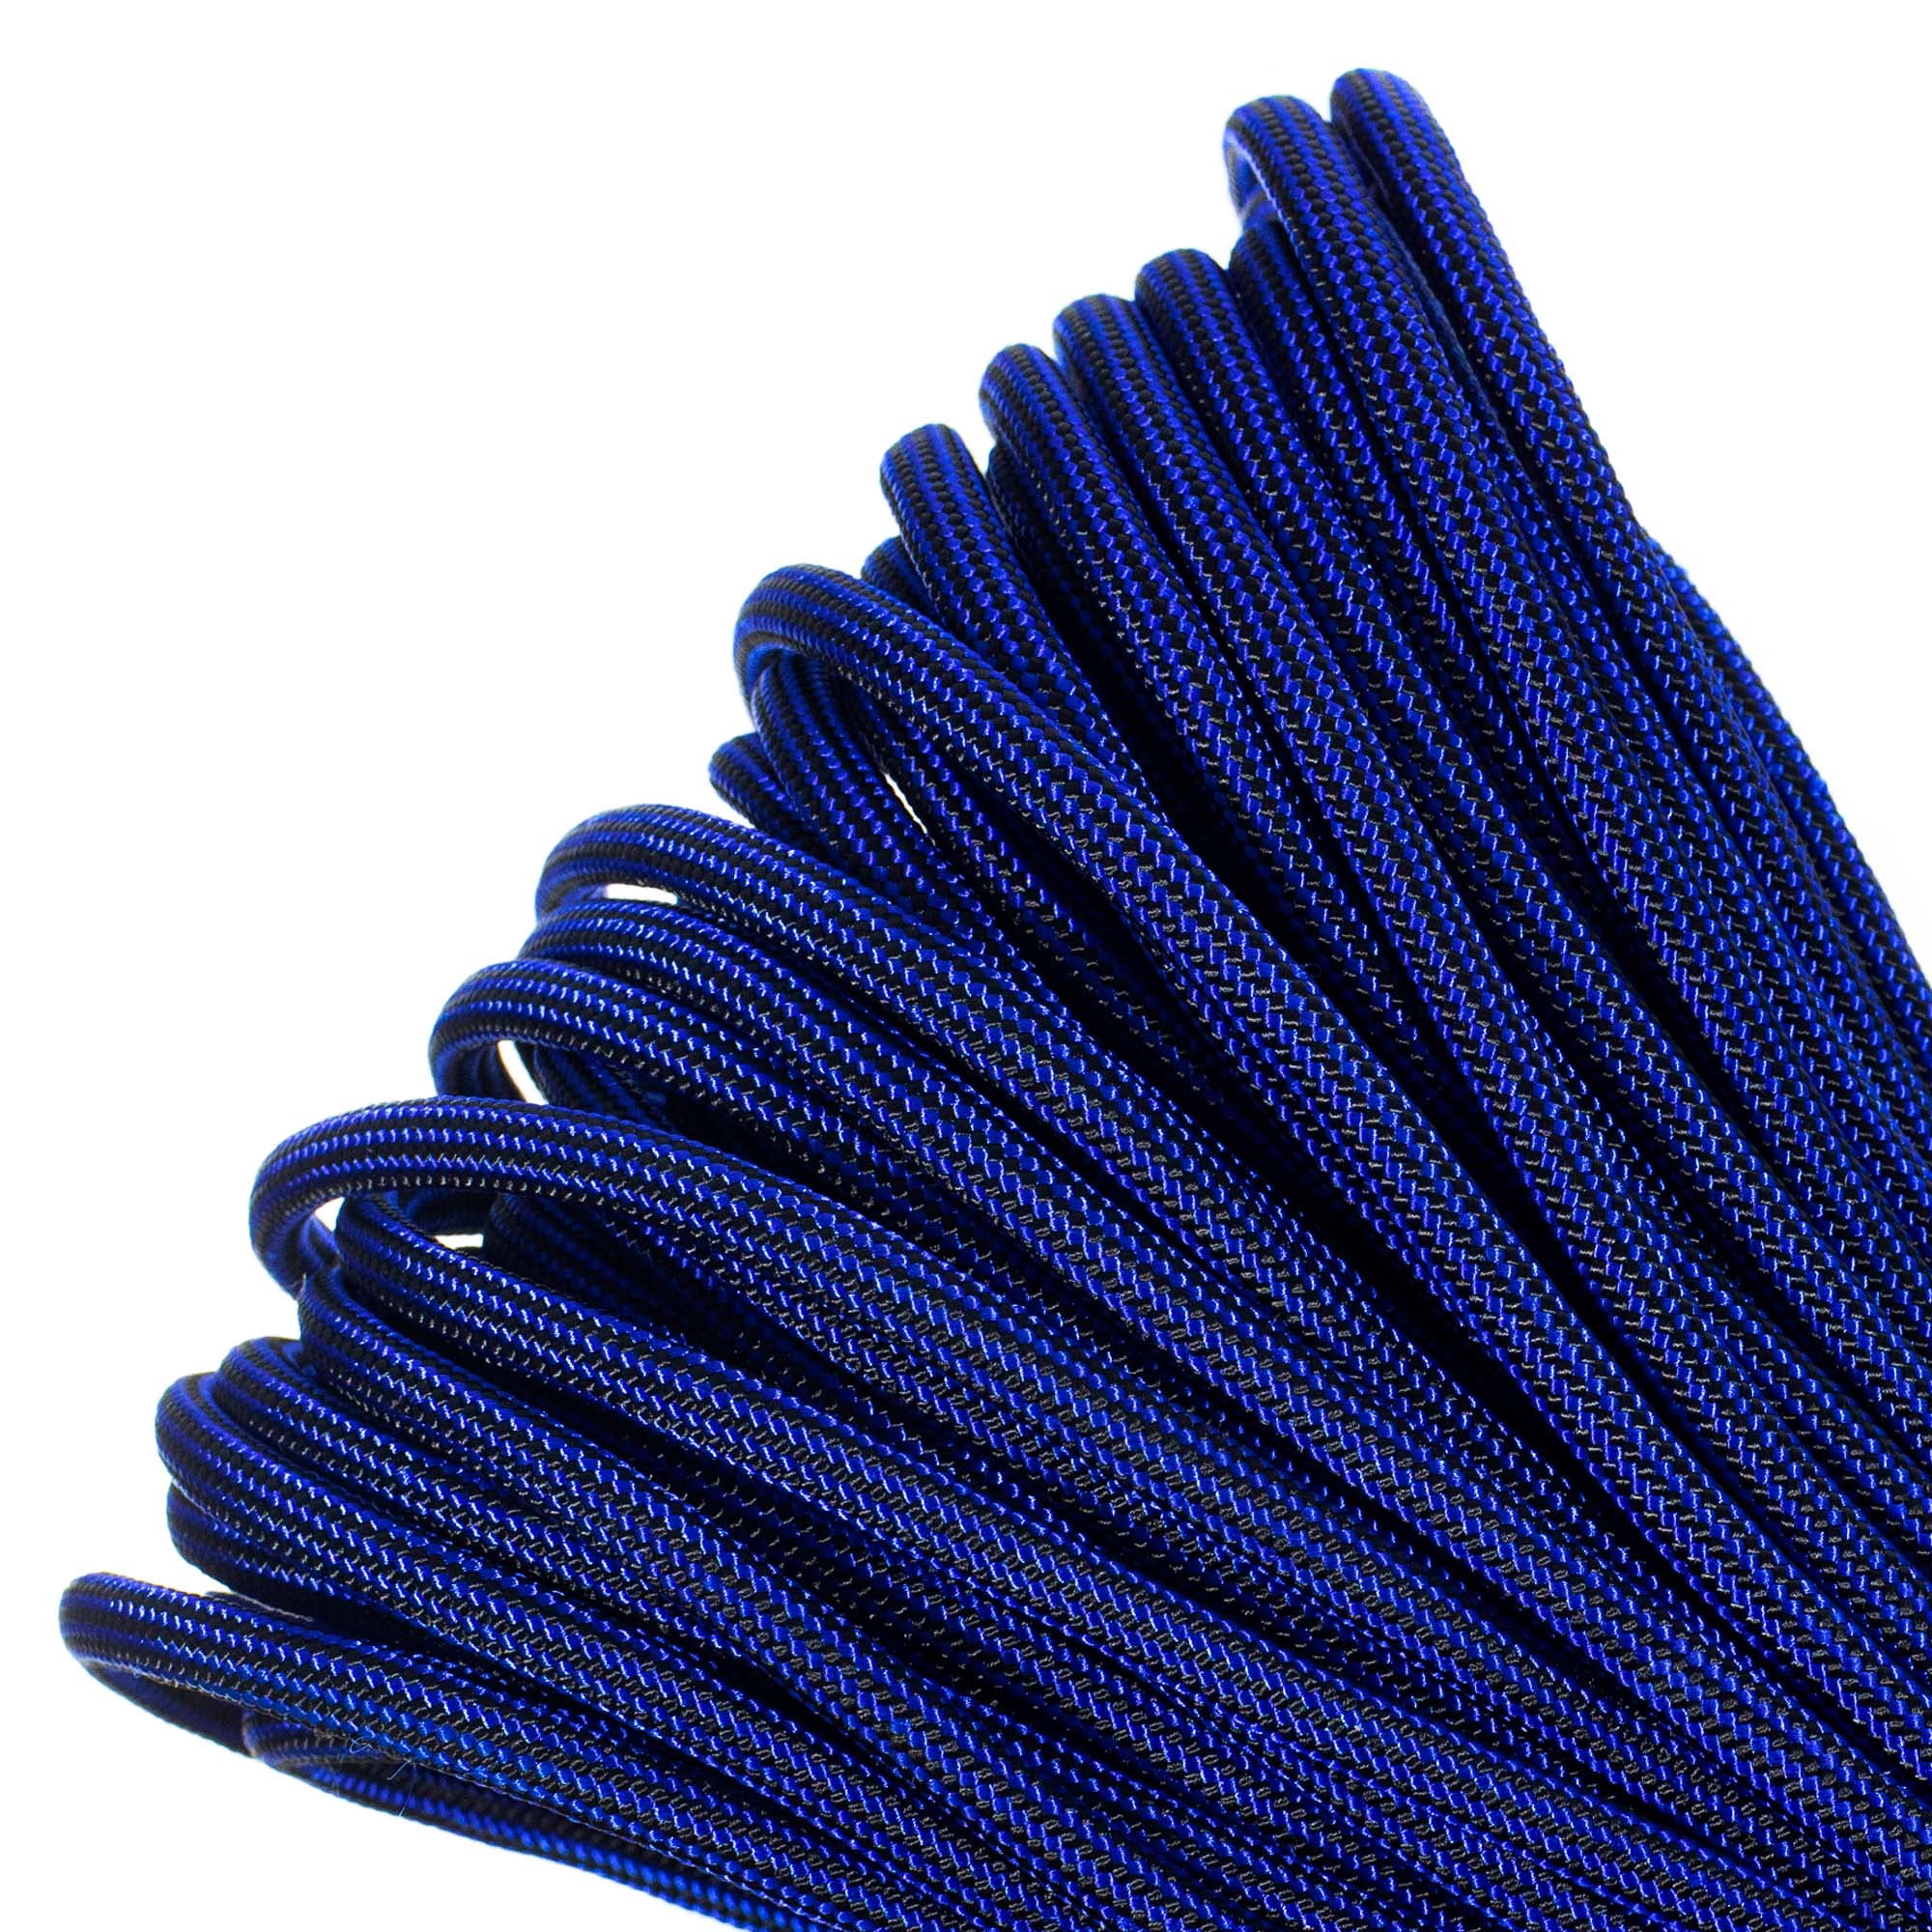 Paracord Parachute Cord 7 Strand Type III 550 lb Break Strength Made by US Government Contractors Made in USA 550 Survival Cord West Coast Paracord 